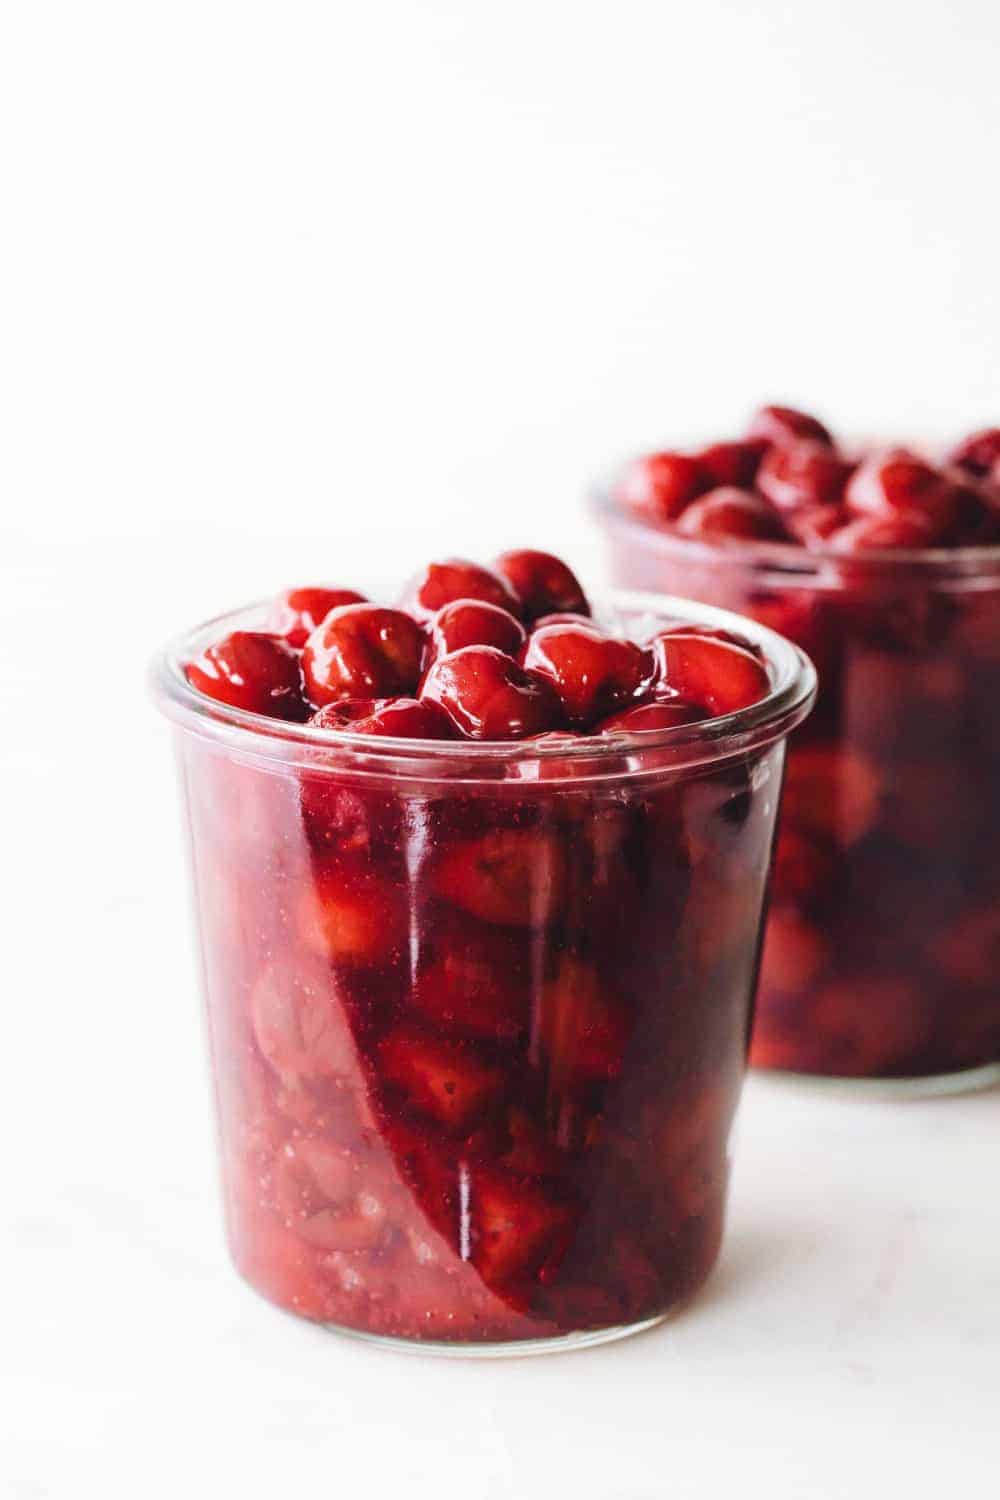 Homemade Cherry Pie Filling is easy to make and tastes so much better than store-bought!